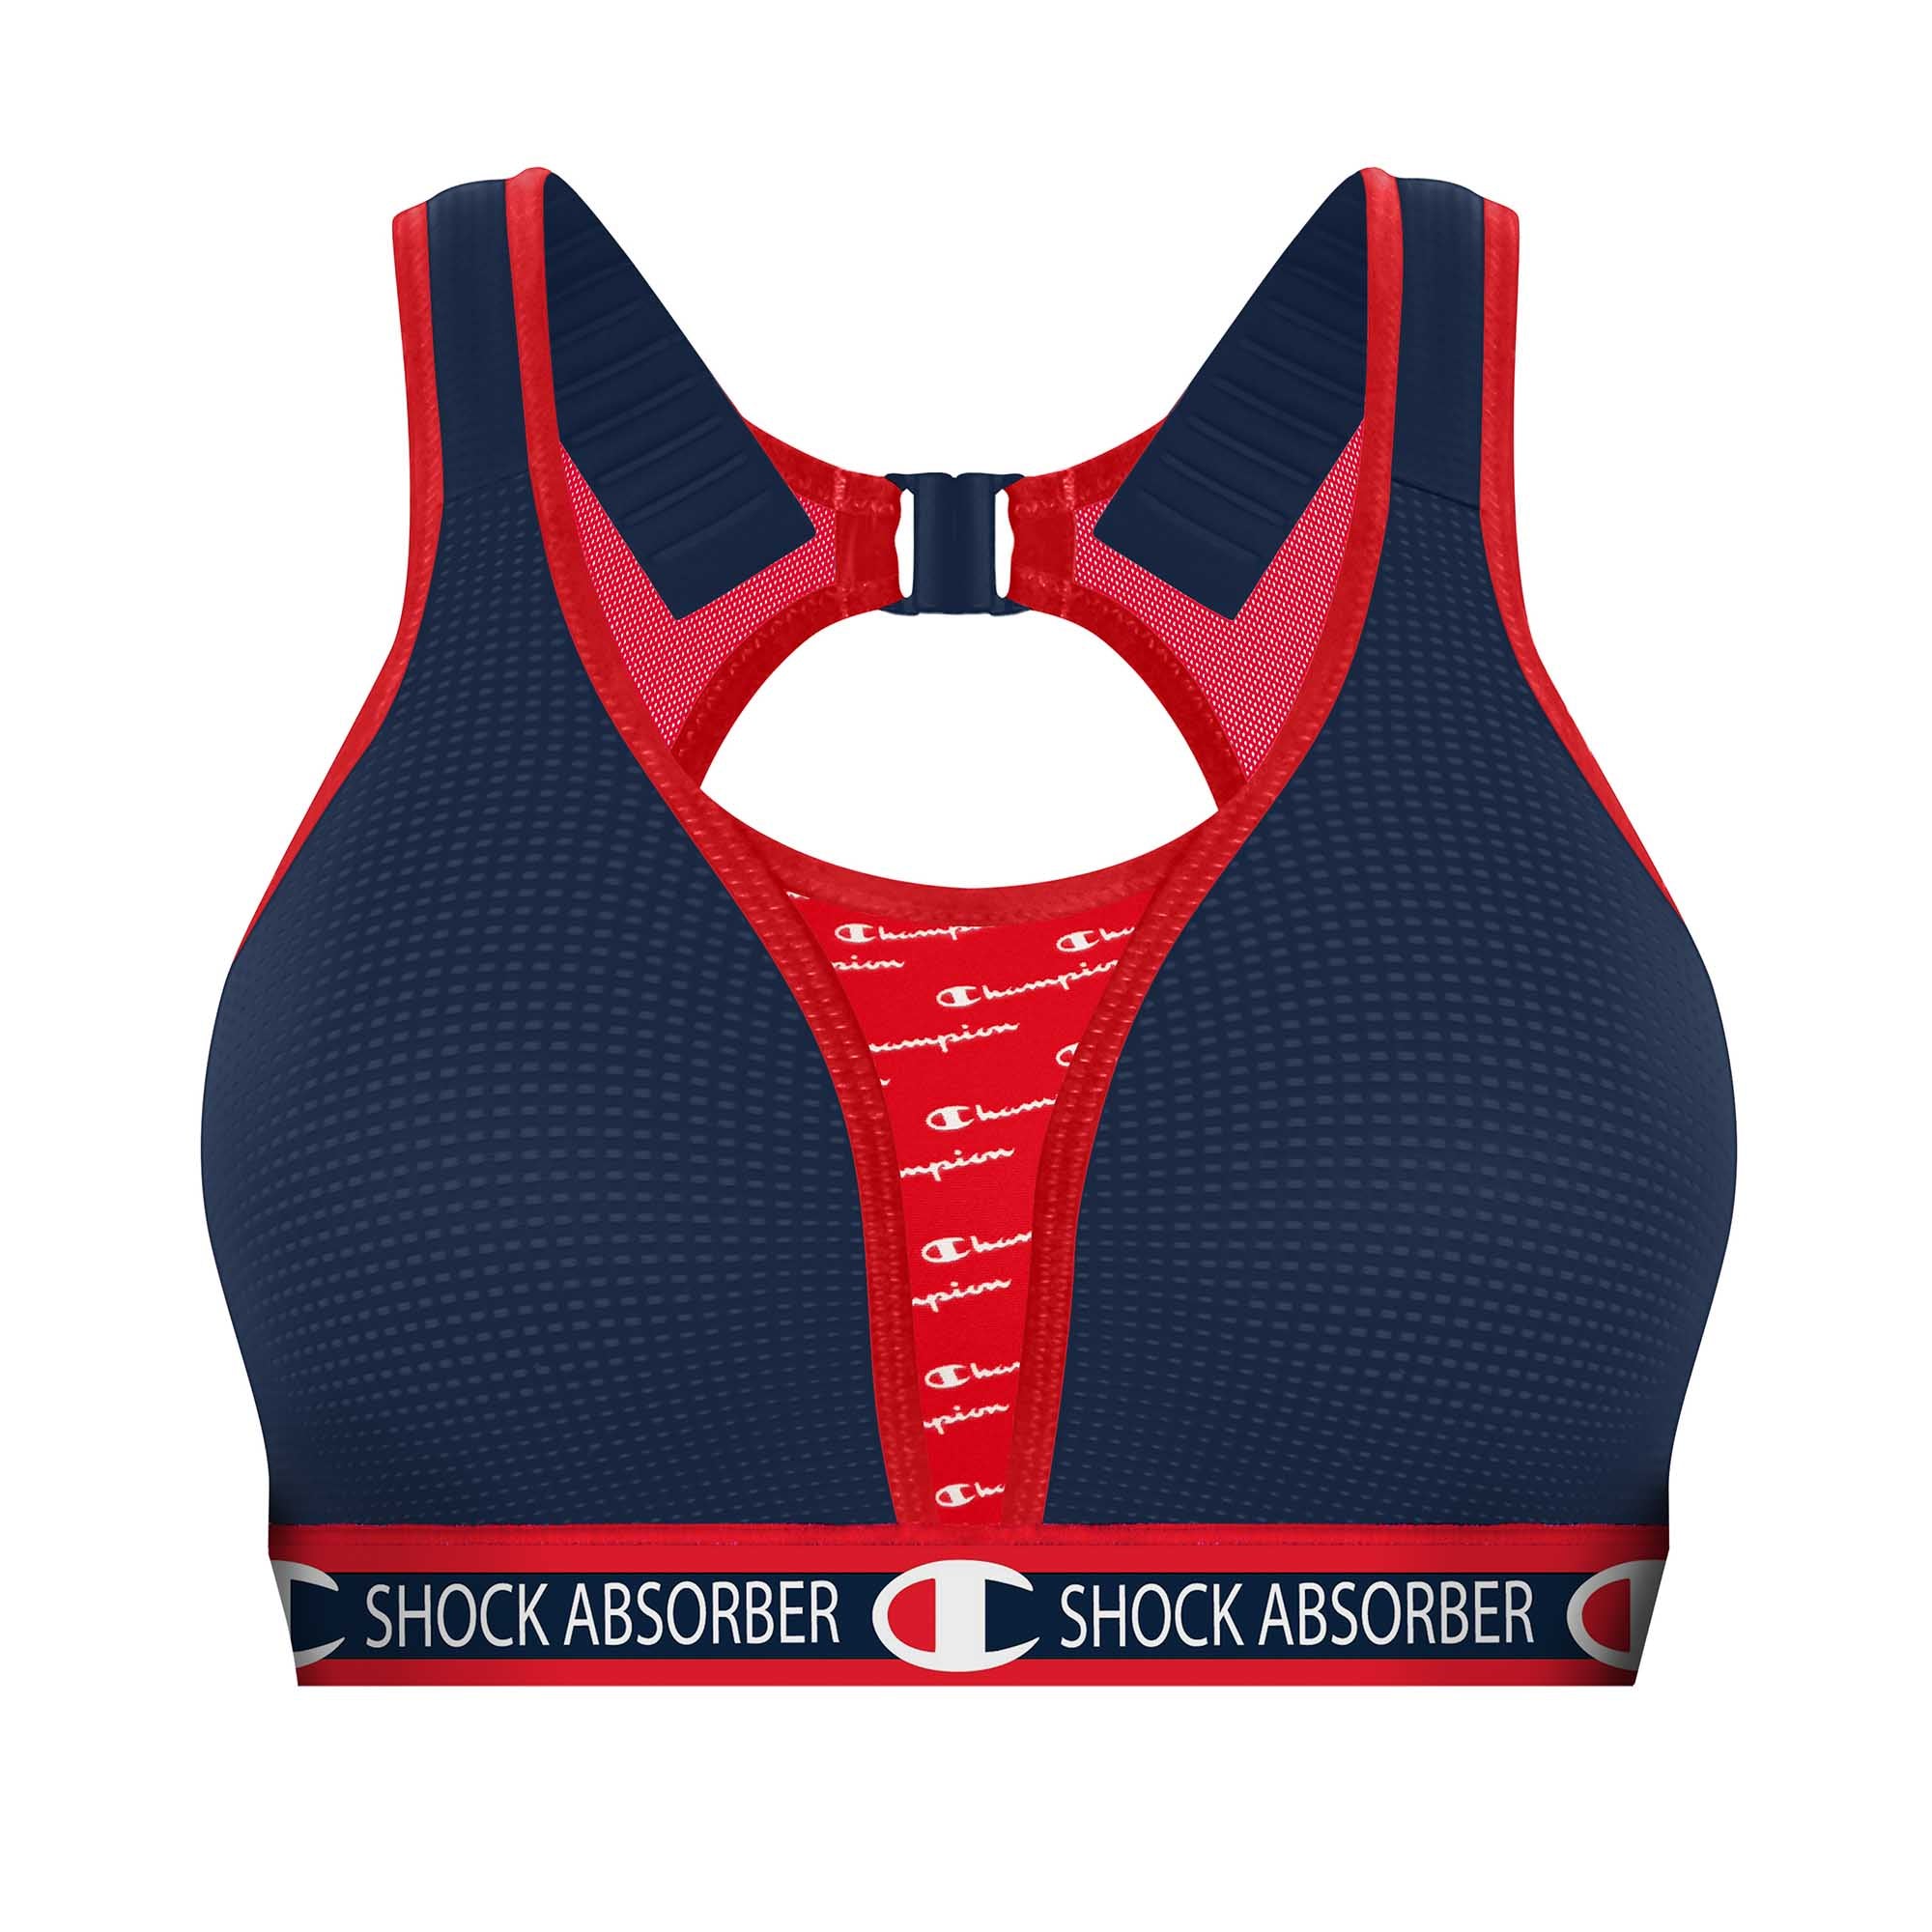 SHOCK ABSORBER ULTIMATE RUN SPORTS BRA HIGH SUPPORT IMPACT S5044 GYM  WOMEN'S NEW